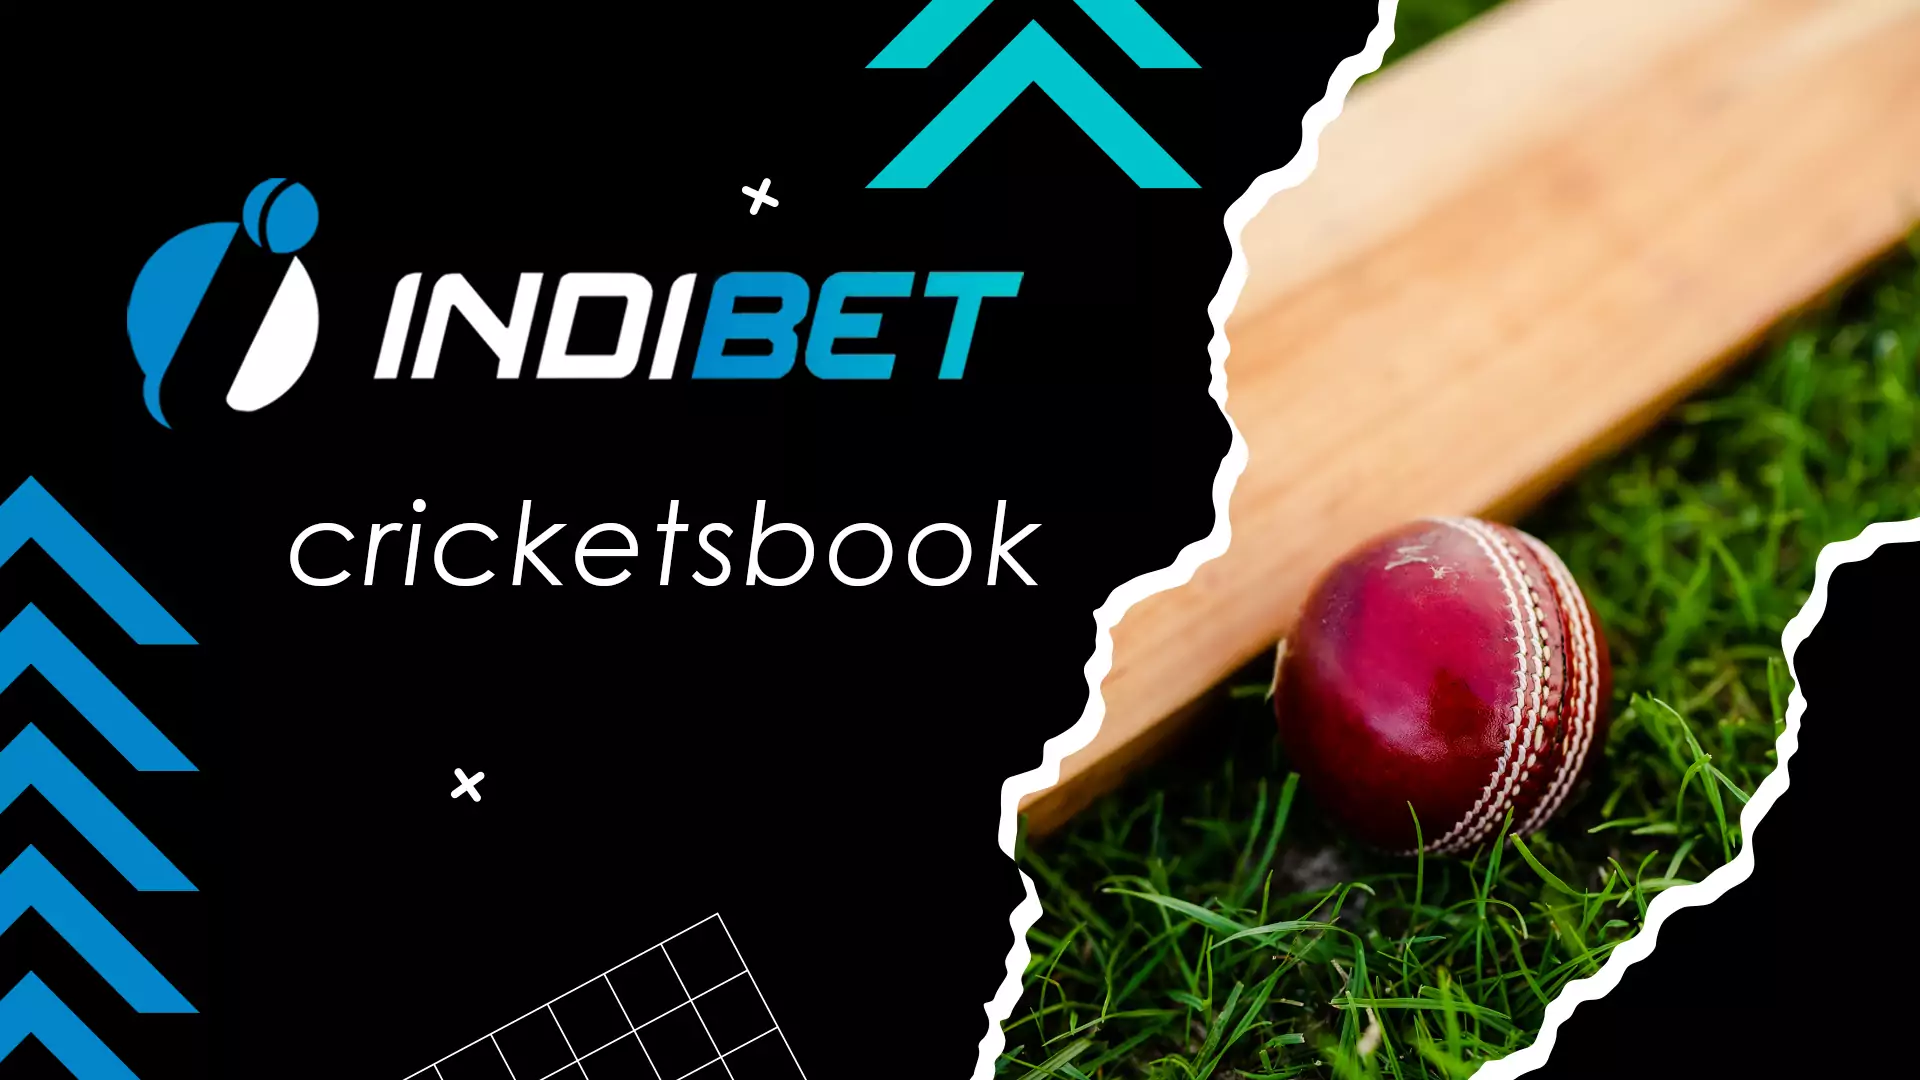 Cricket is so popular among Indibet users that the bookmaker office made the cricketbook section.